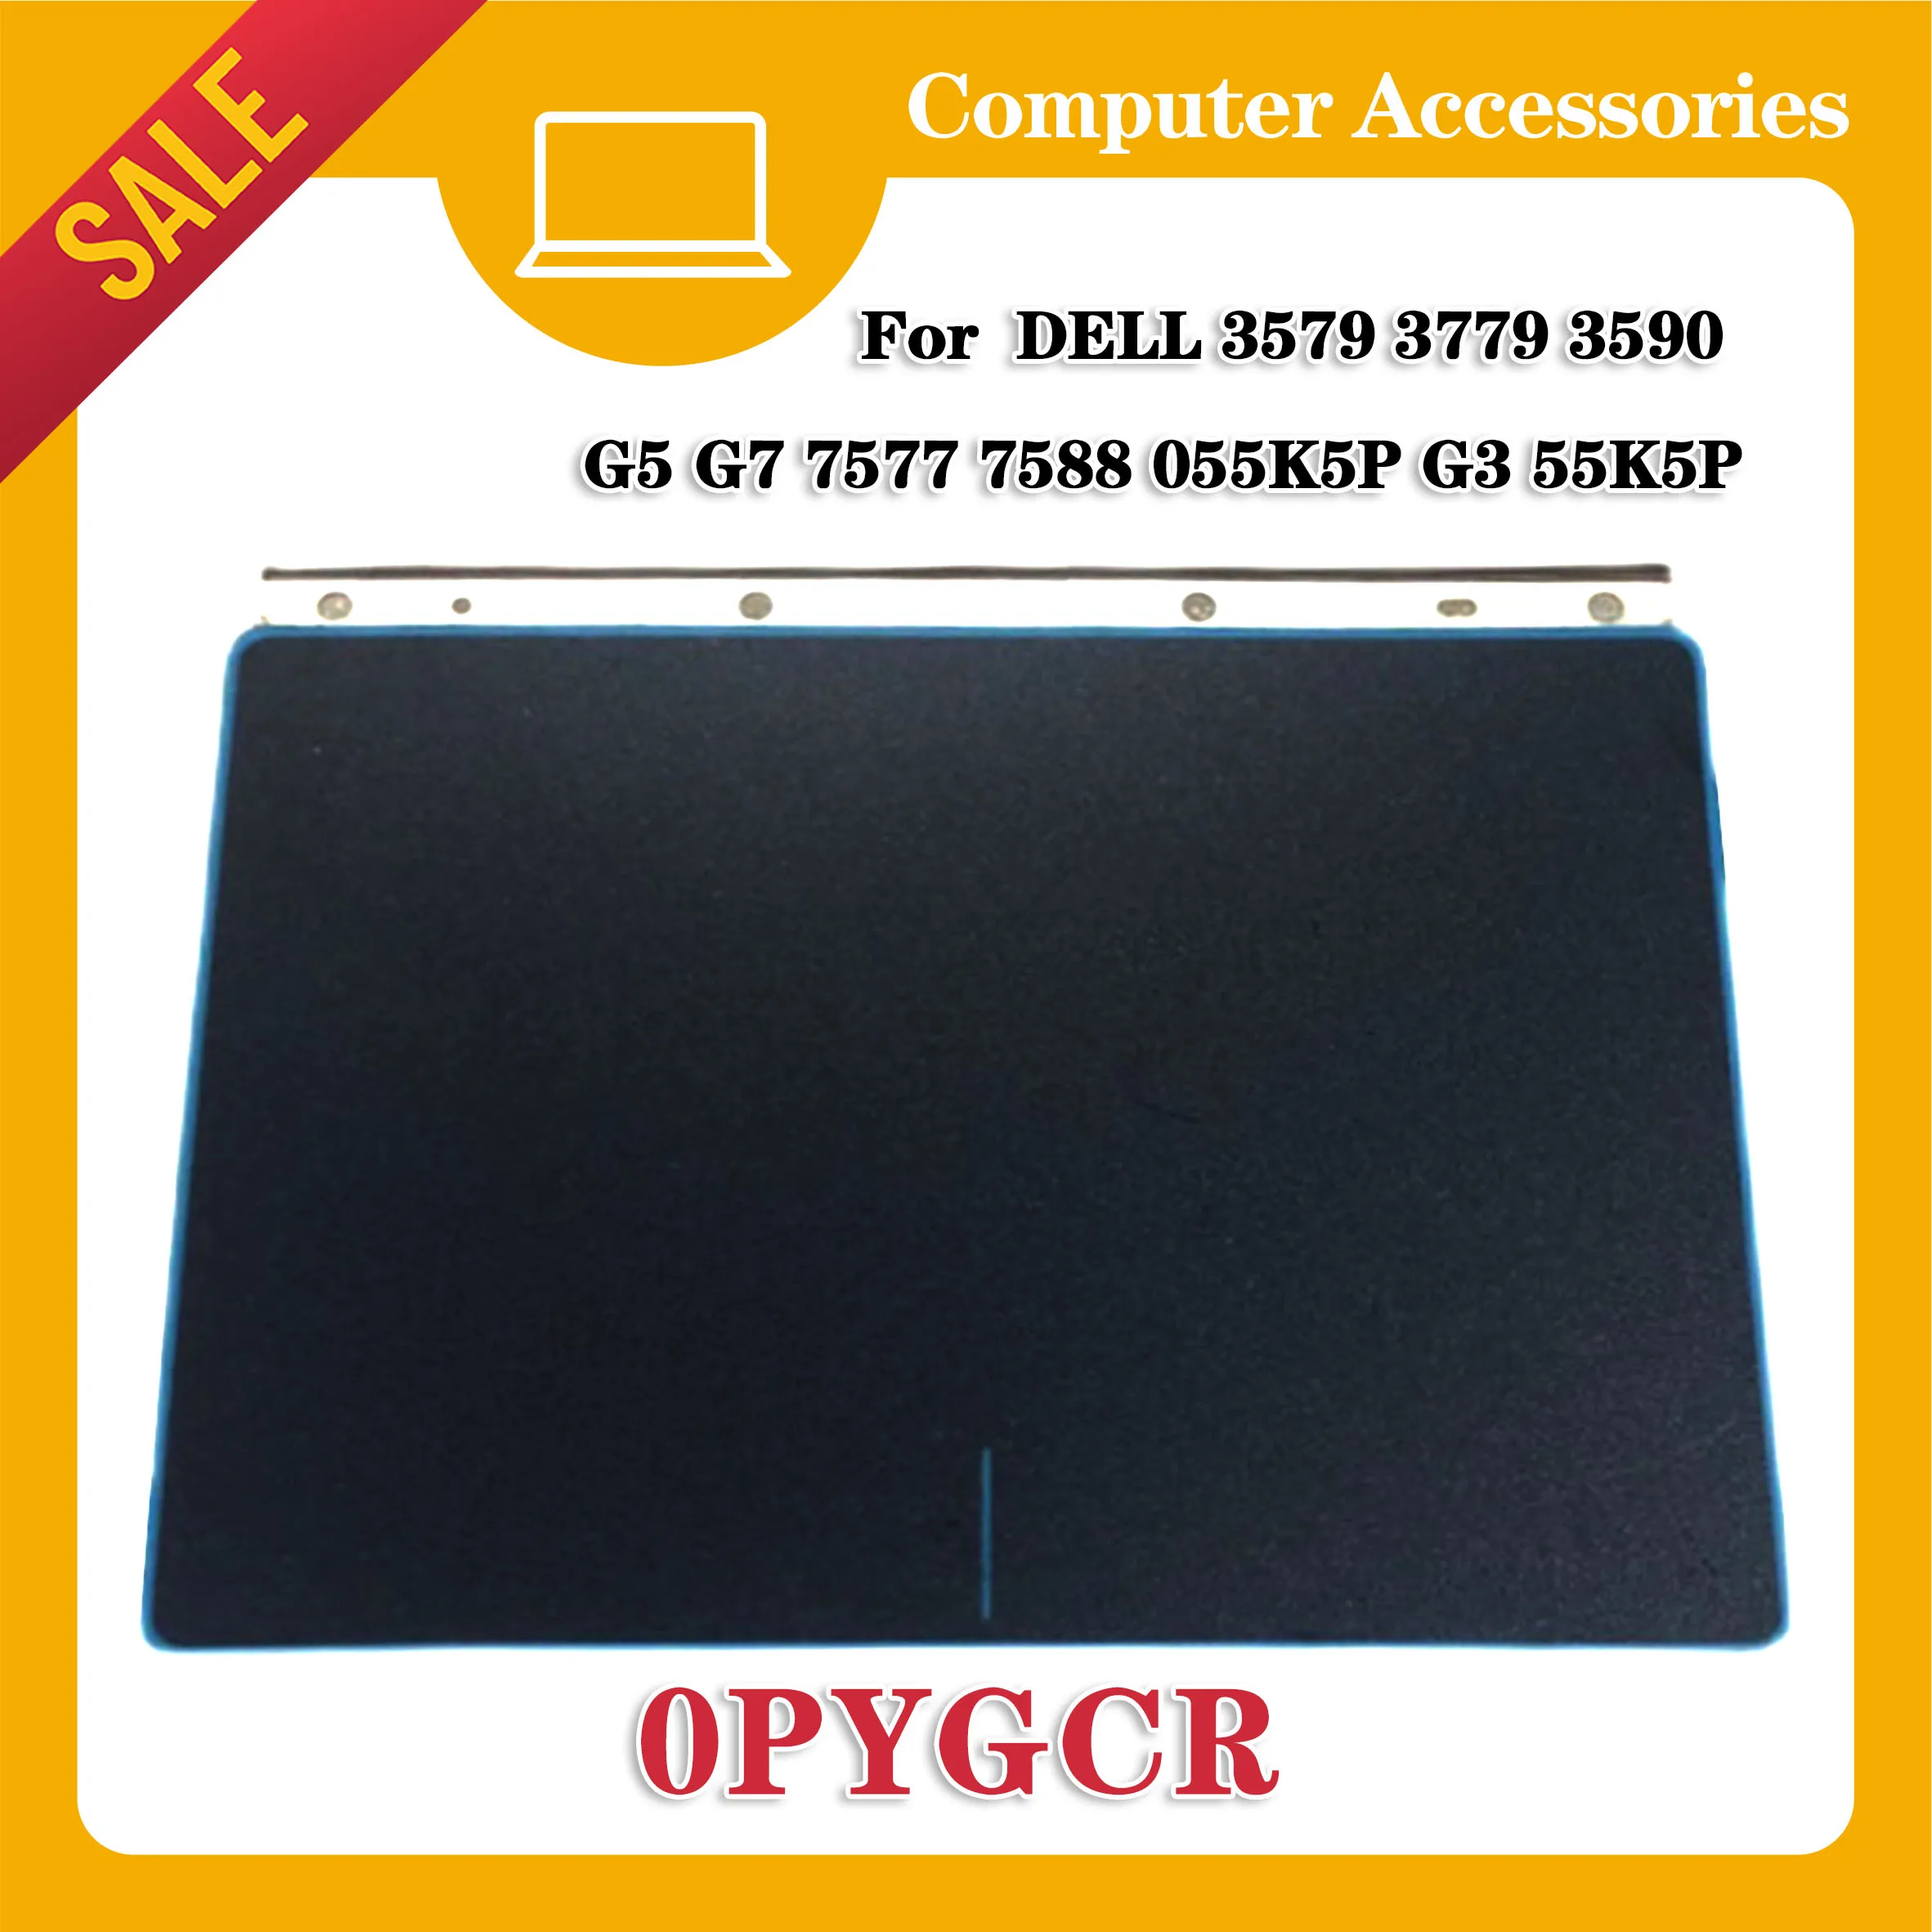 

For DELL 3579 3779 3590 G5 G7 7577 7588 055K5P G3 55K5P Black portable touchpad with blue border